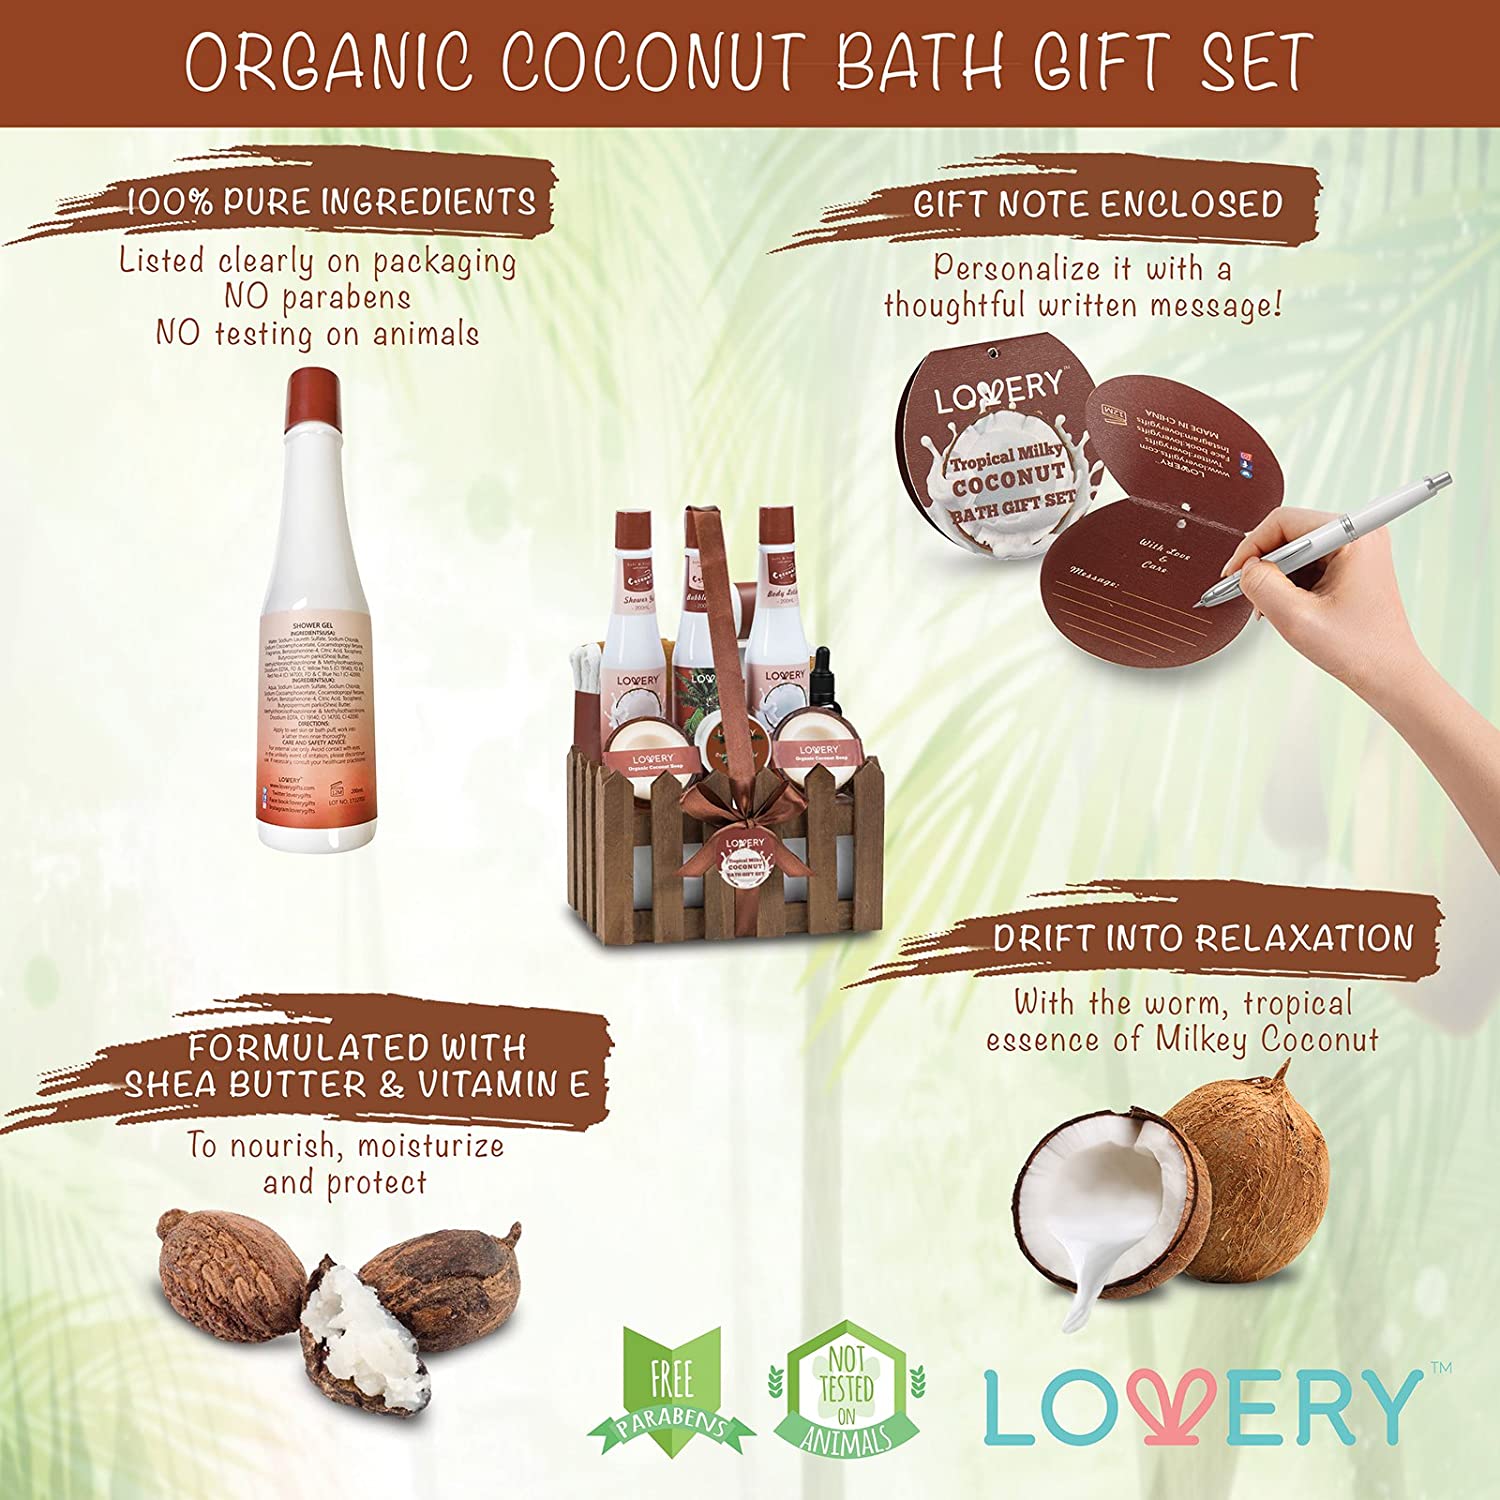 Lovery Organic Milky Coconut Bath Set, Coconut Gift Set, Milky Coconut Bath Set, Bath & Body Kit, Bath Cosmetics, All Natural, Vitamin E, Shea Butter, Self-Care Package, Hydrating Skin Care, Gift Bath Set, Perfect Gift, Spa Set, Spa Kit, Organic Spa Set